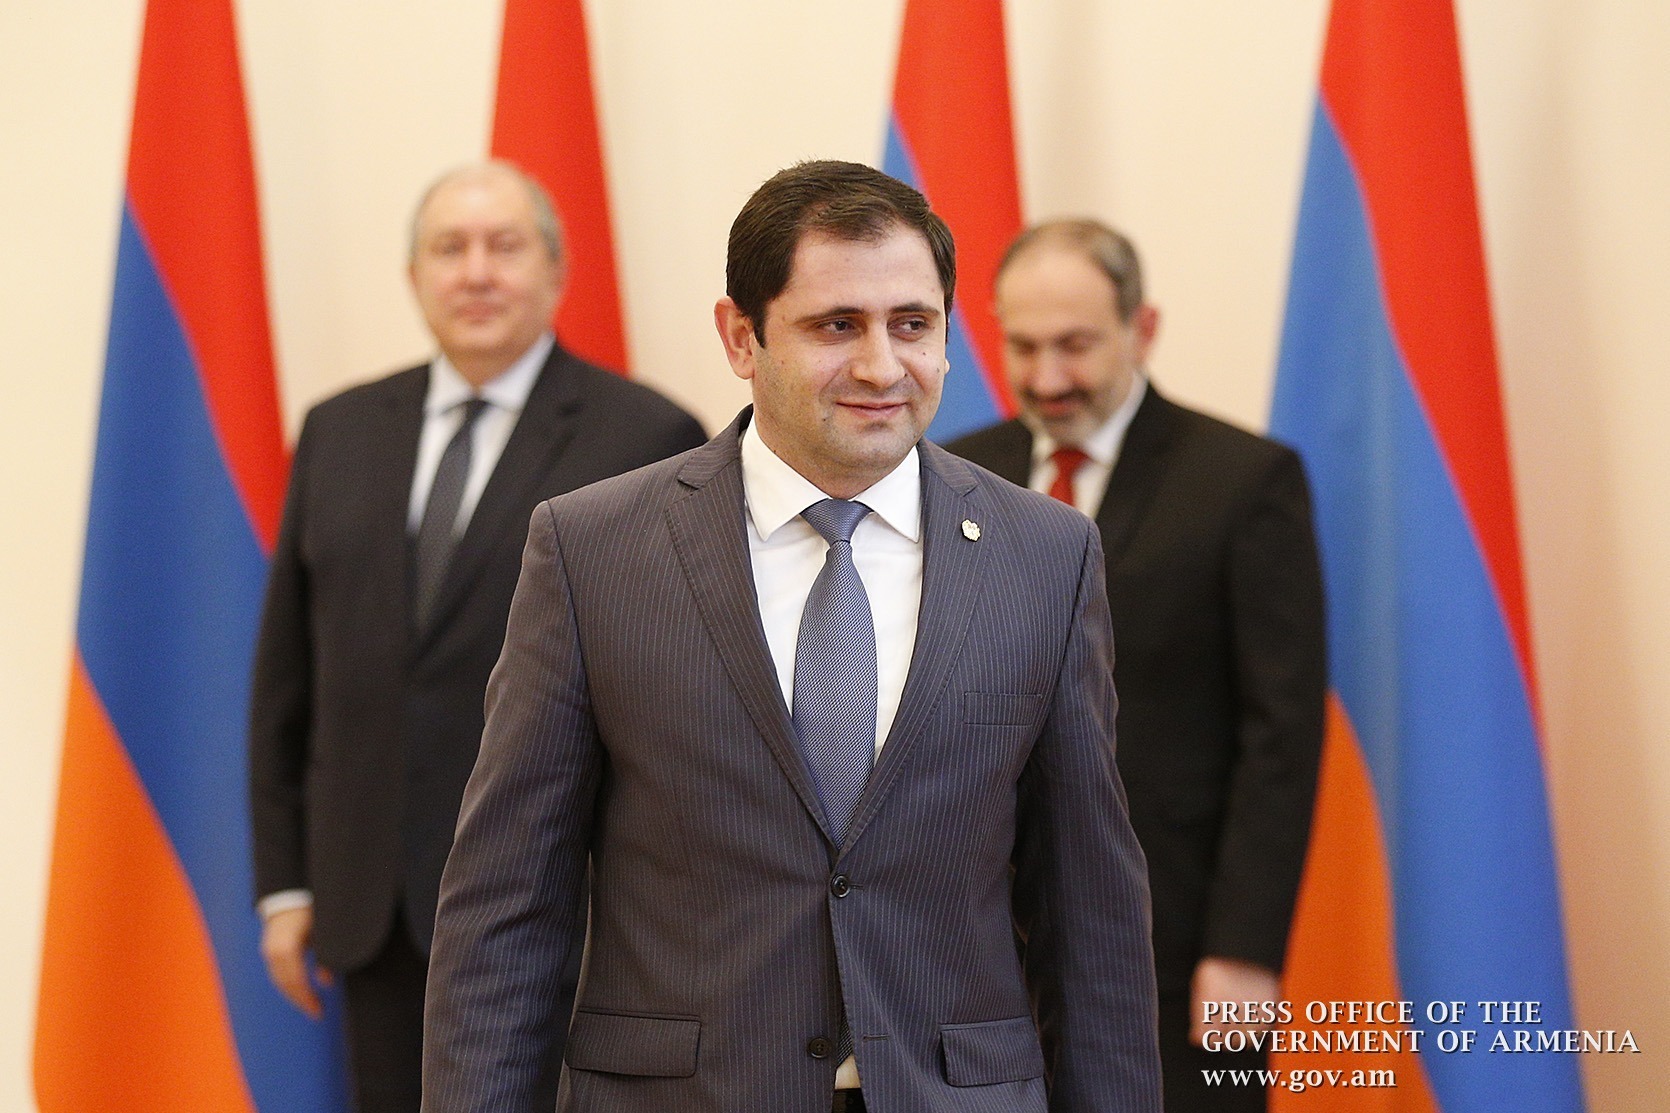 Armenia’s defense minister replaced amidst border incursions by Azerbaijan